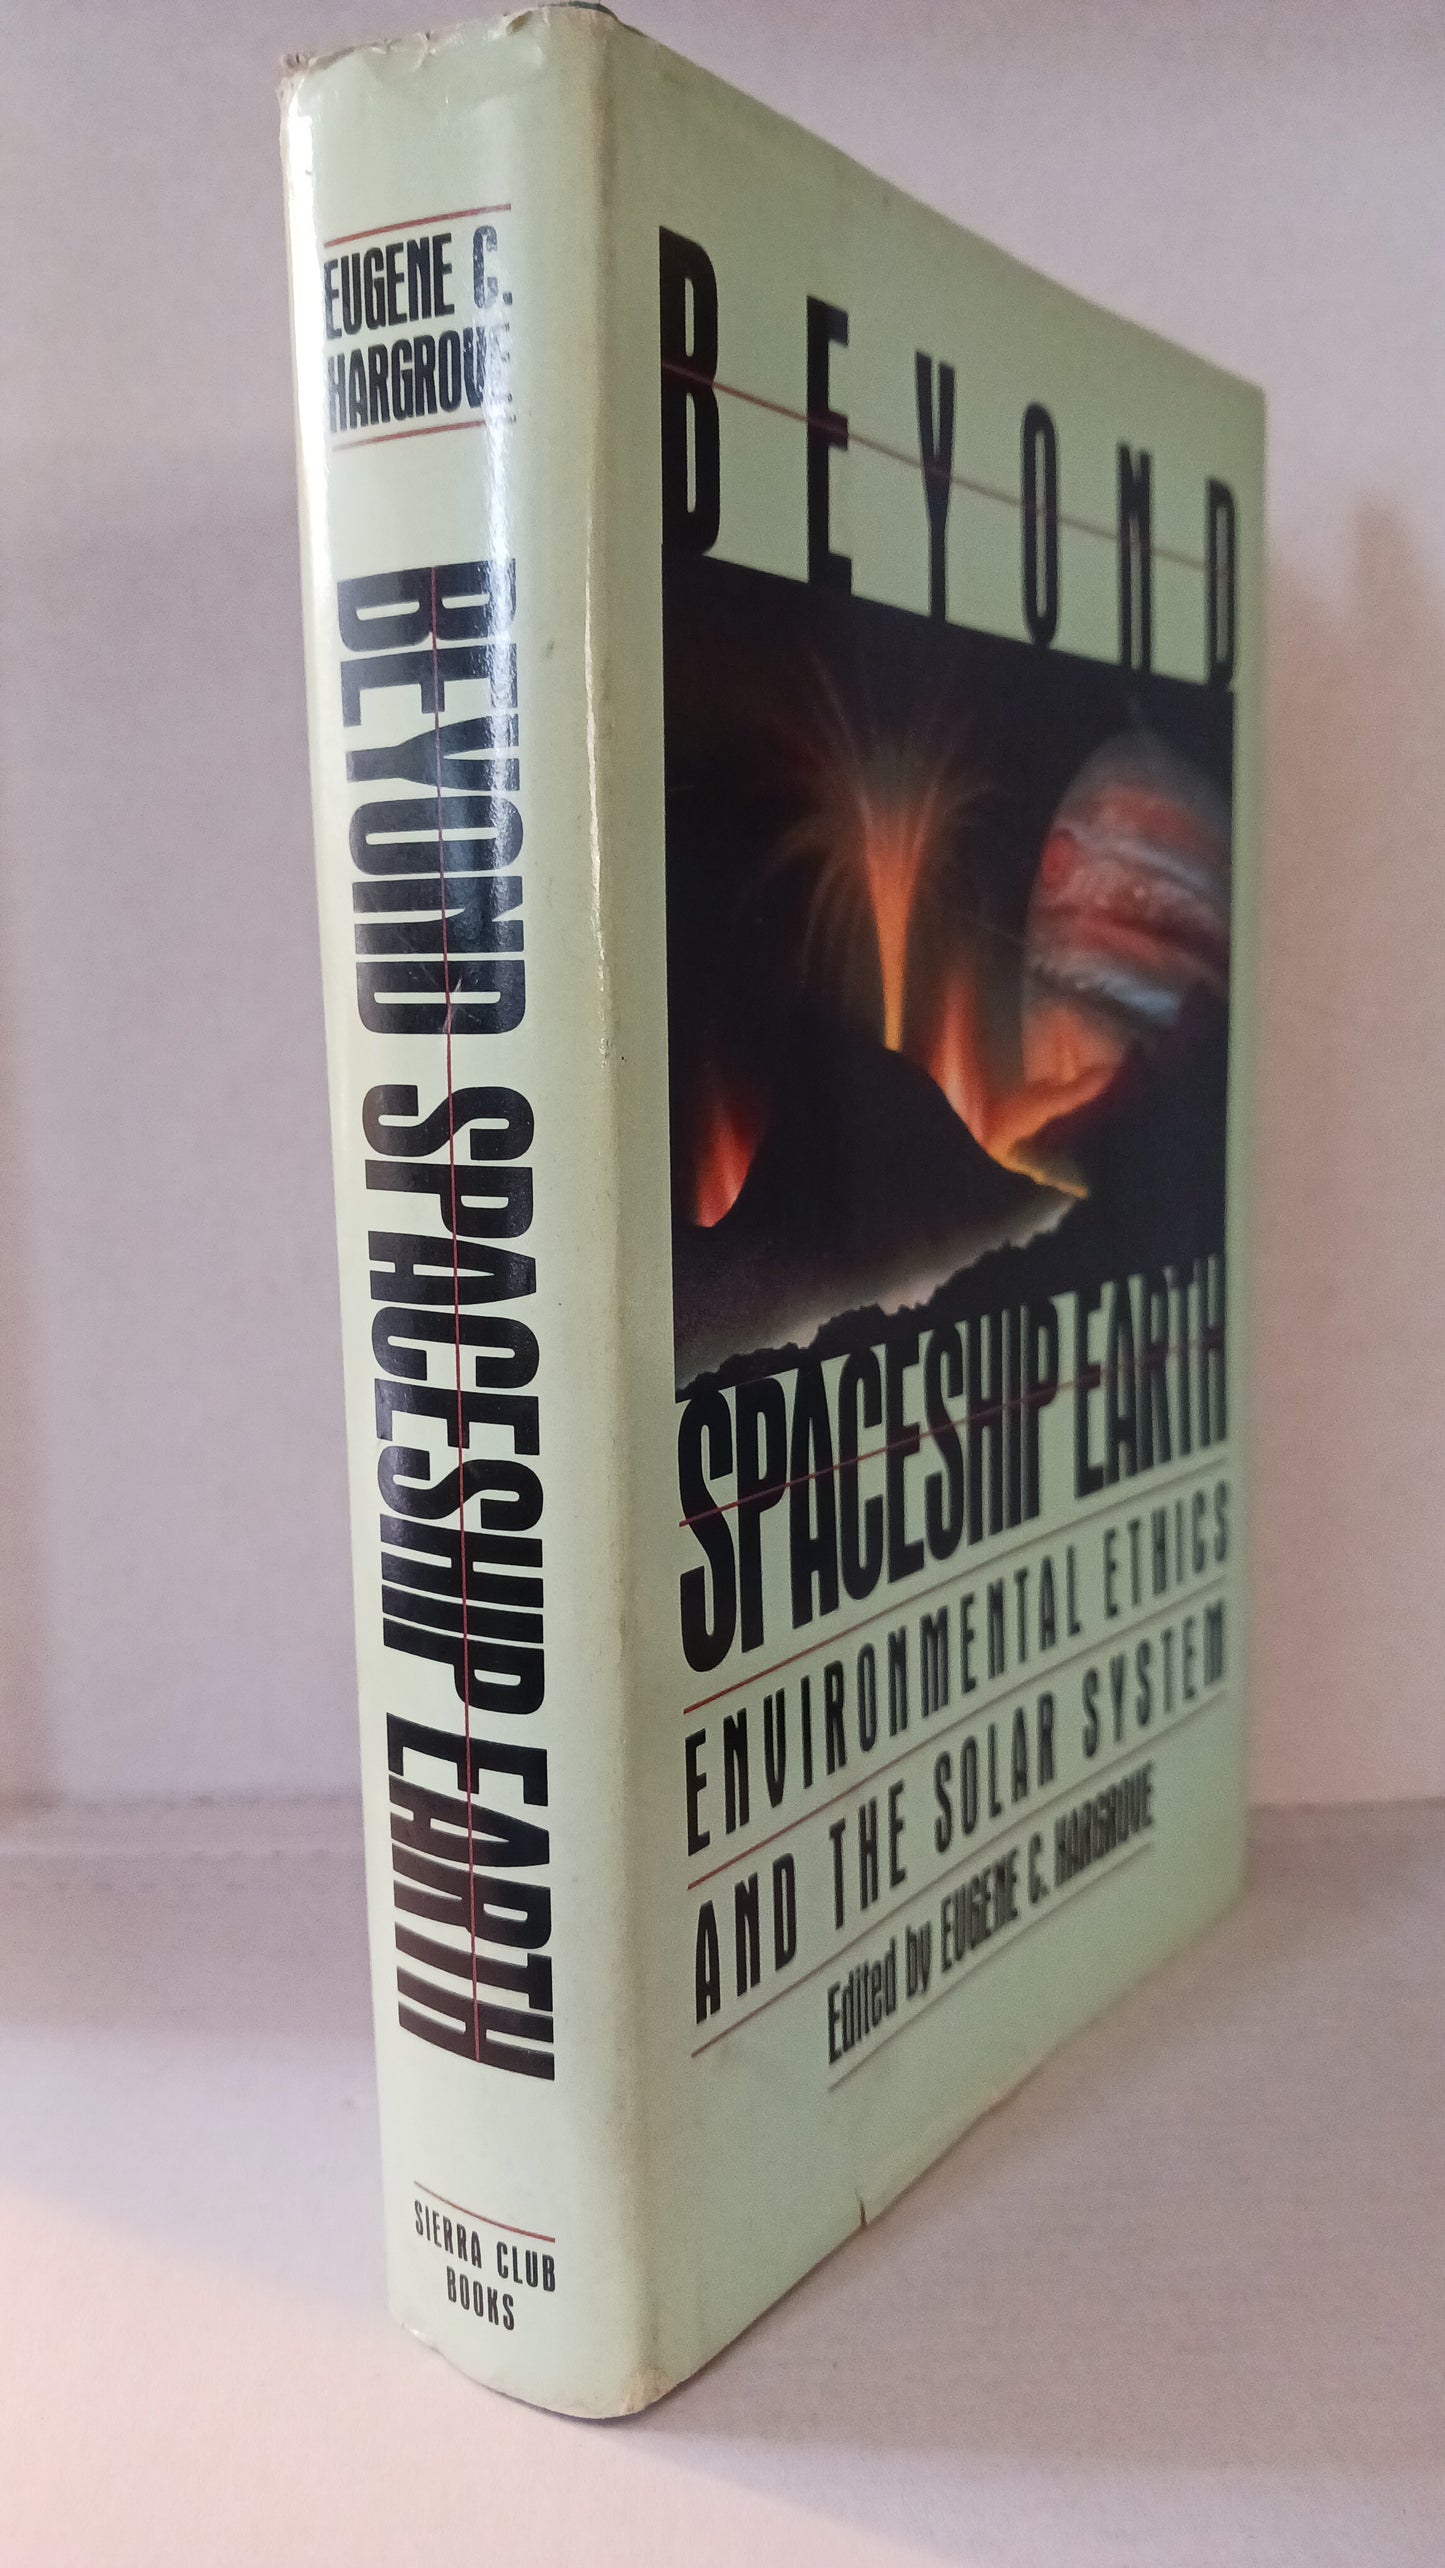 Beyond Spaceship Earth: Environmental Ethics and the Solar System Hardcover – January 12, 1987